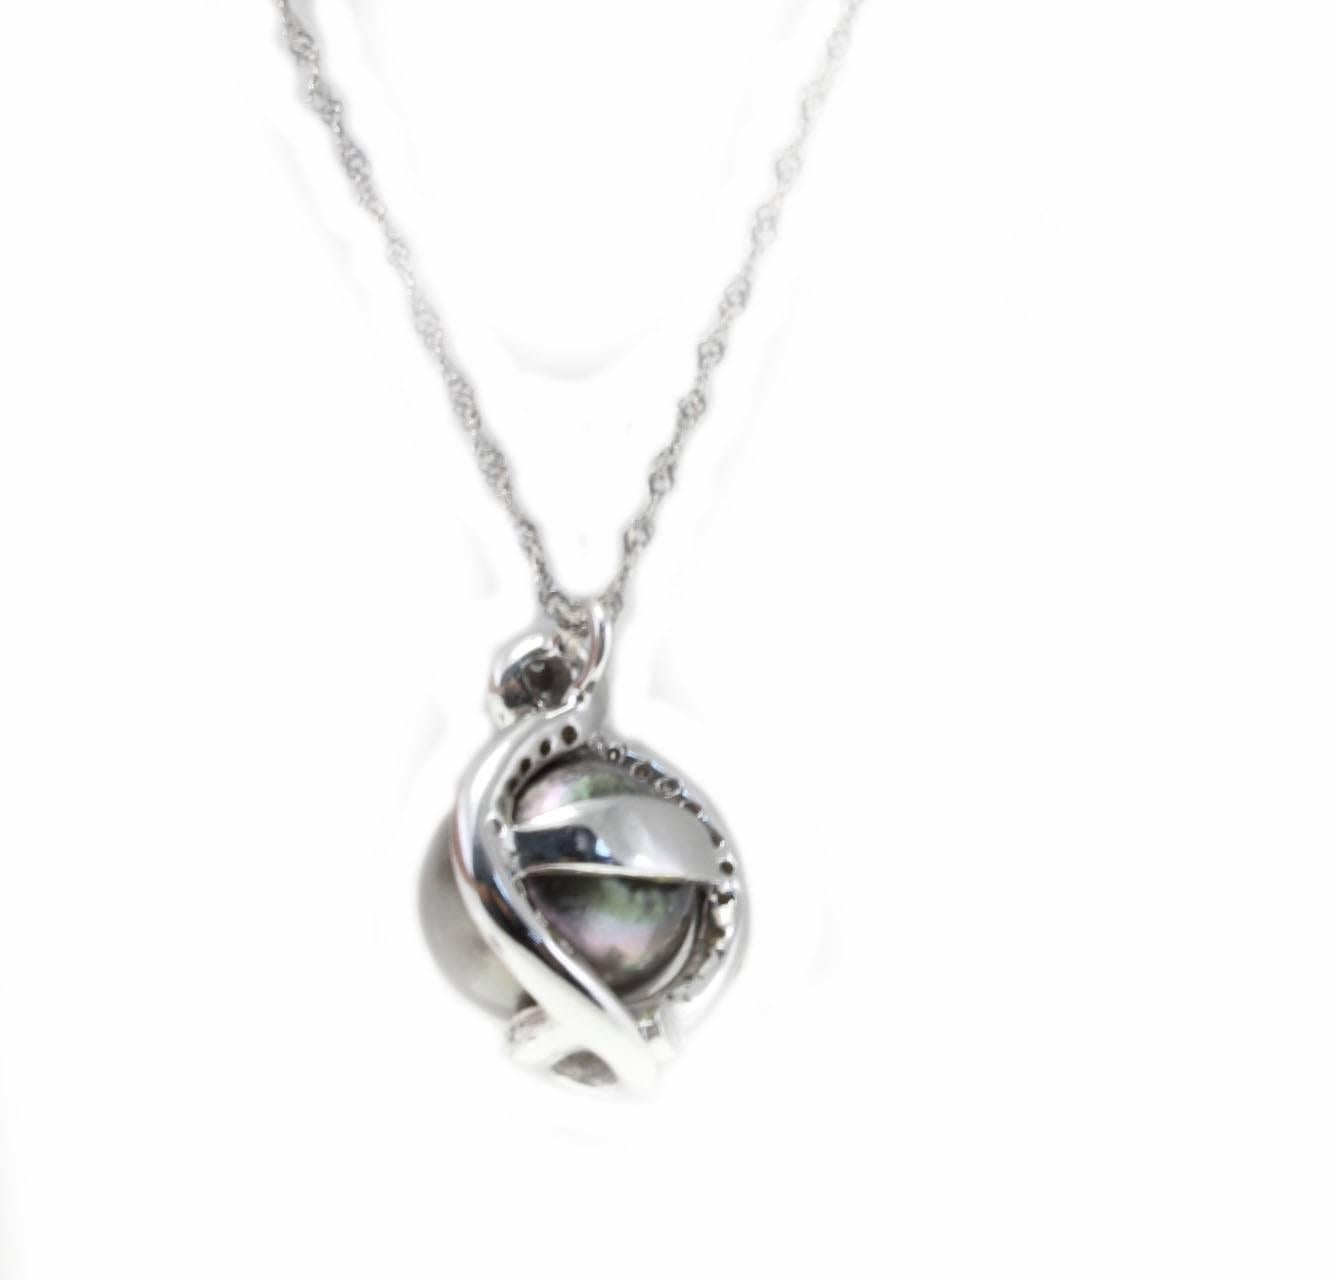 Charming and fashion necklace with a pendant composed of a single black pearl surrounded with a frame of diamonds.  All is mounted in 18Kt white gold. Chain run with the pendant.
Tot weight 8.3 gr
Diamonds 0.32 Kt
Pearl 11.06 ge, diameter 12mm

Rf.